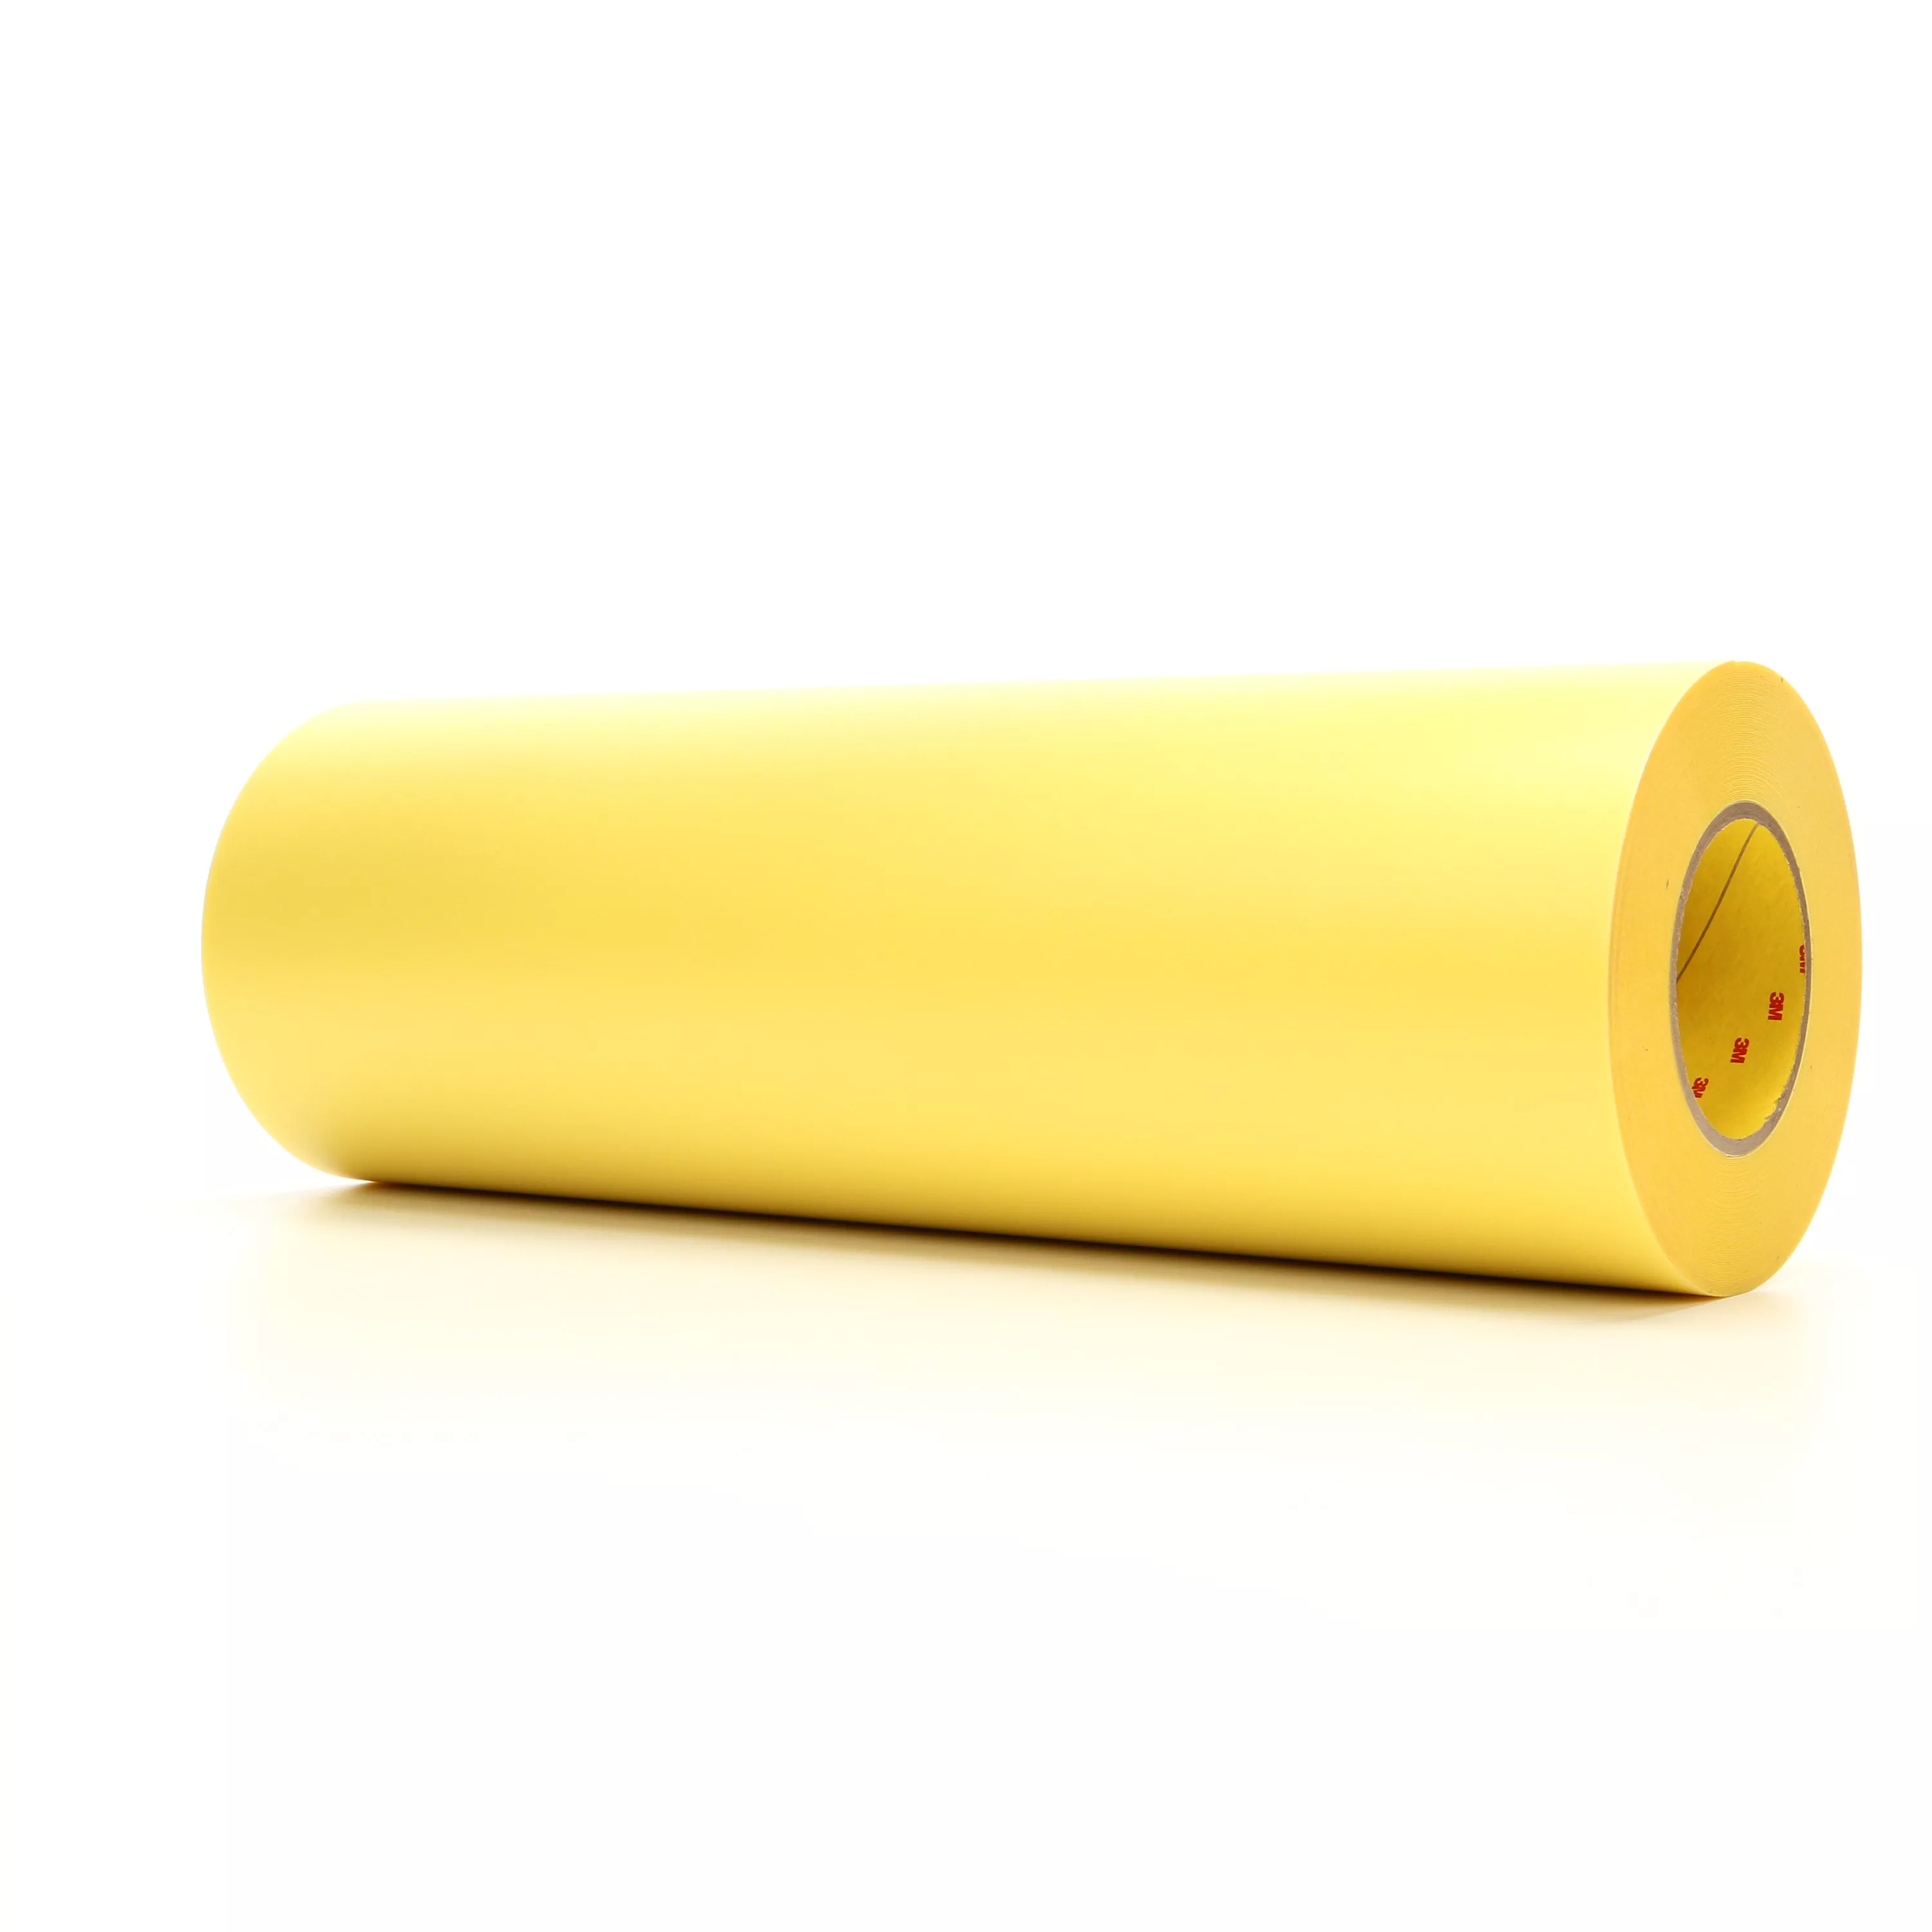 3M™ Cushion-Mount™ Plus Plate Mounting Tape E1315, Yellow, 18 in x
25
yd, 15 mil, 1 Roll/Case